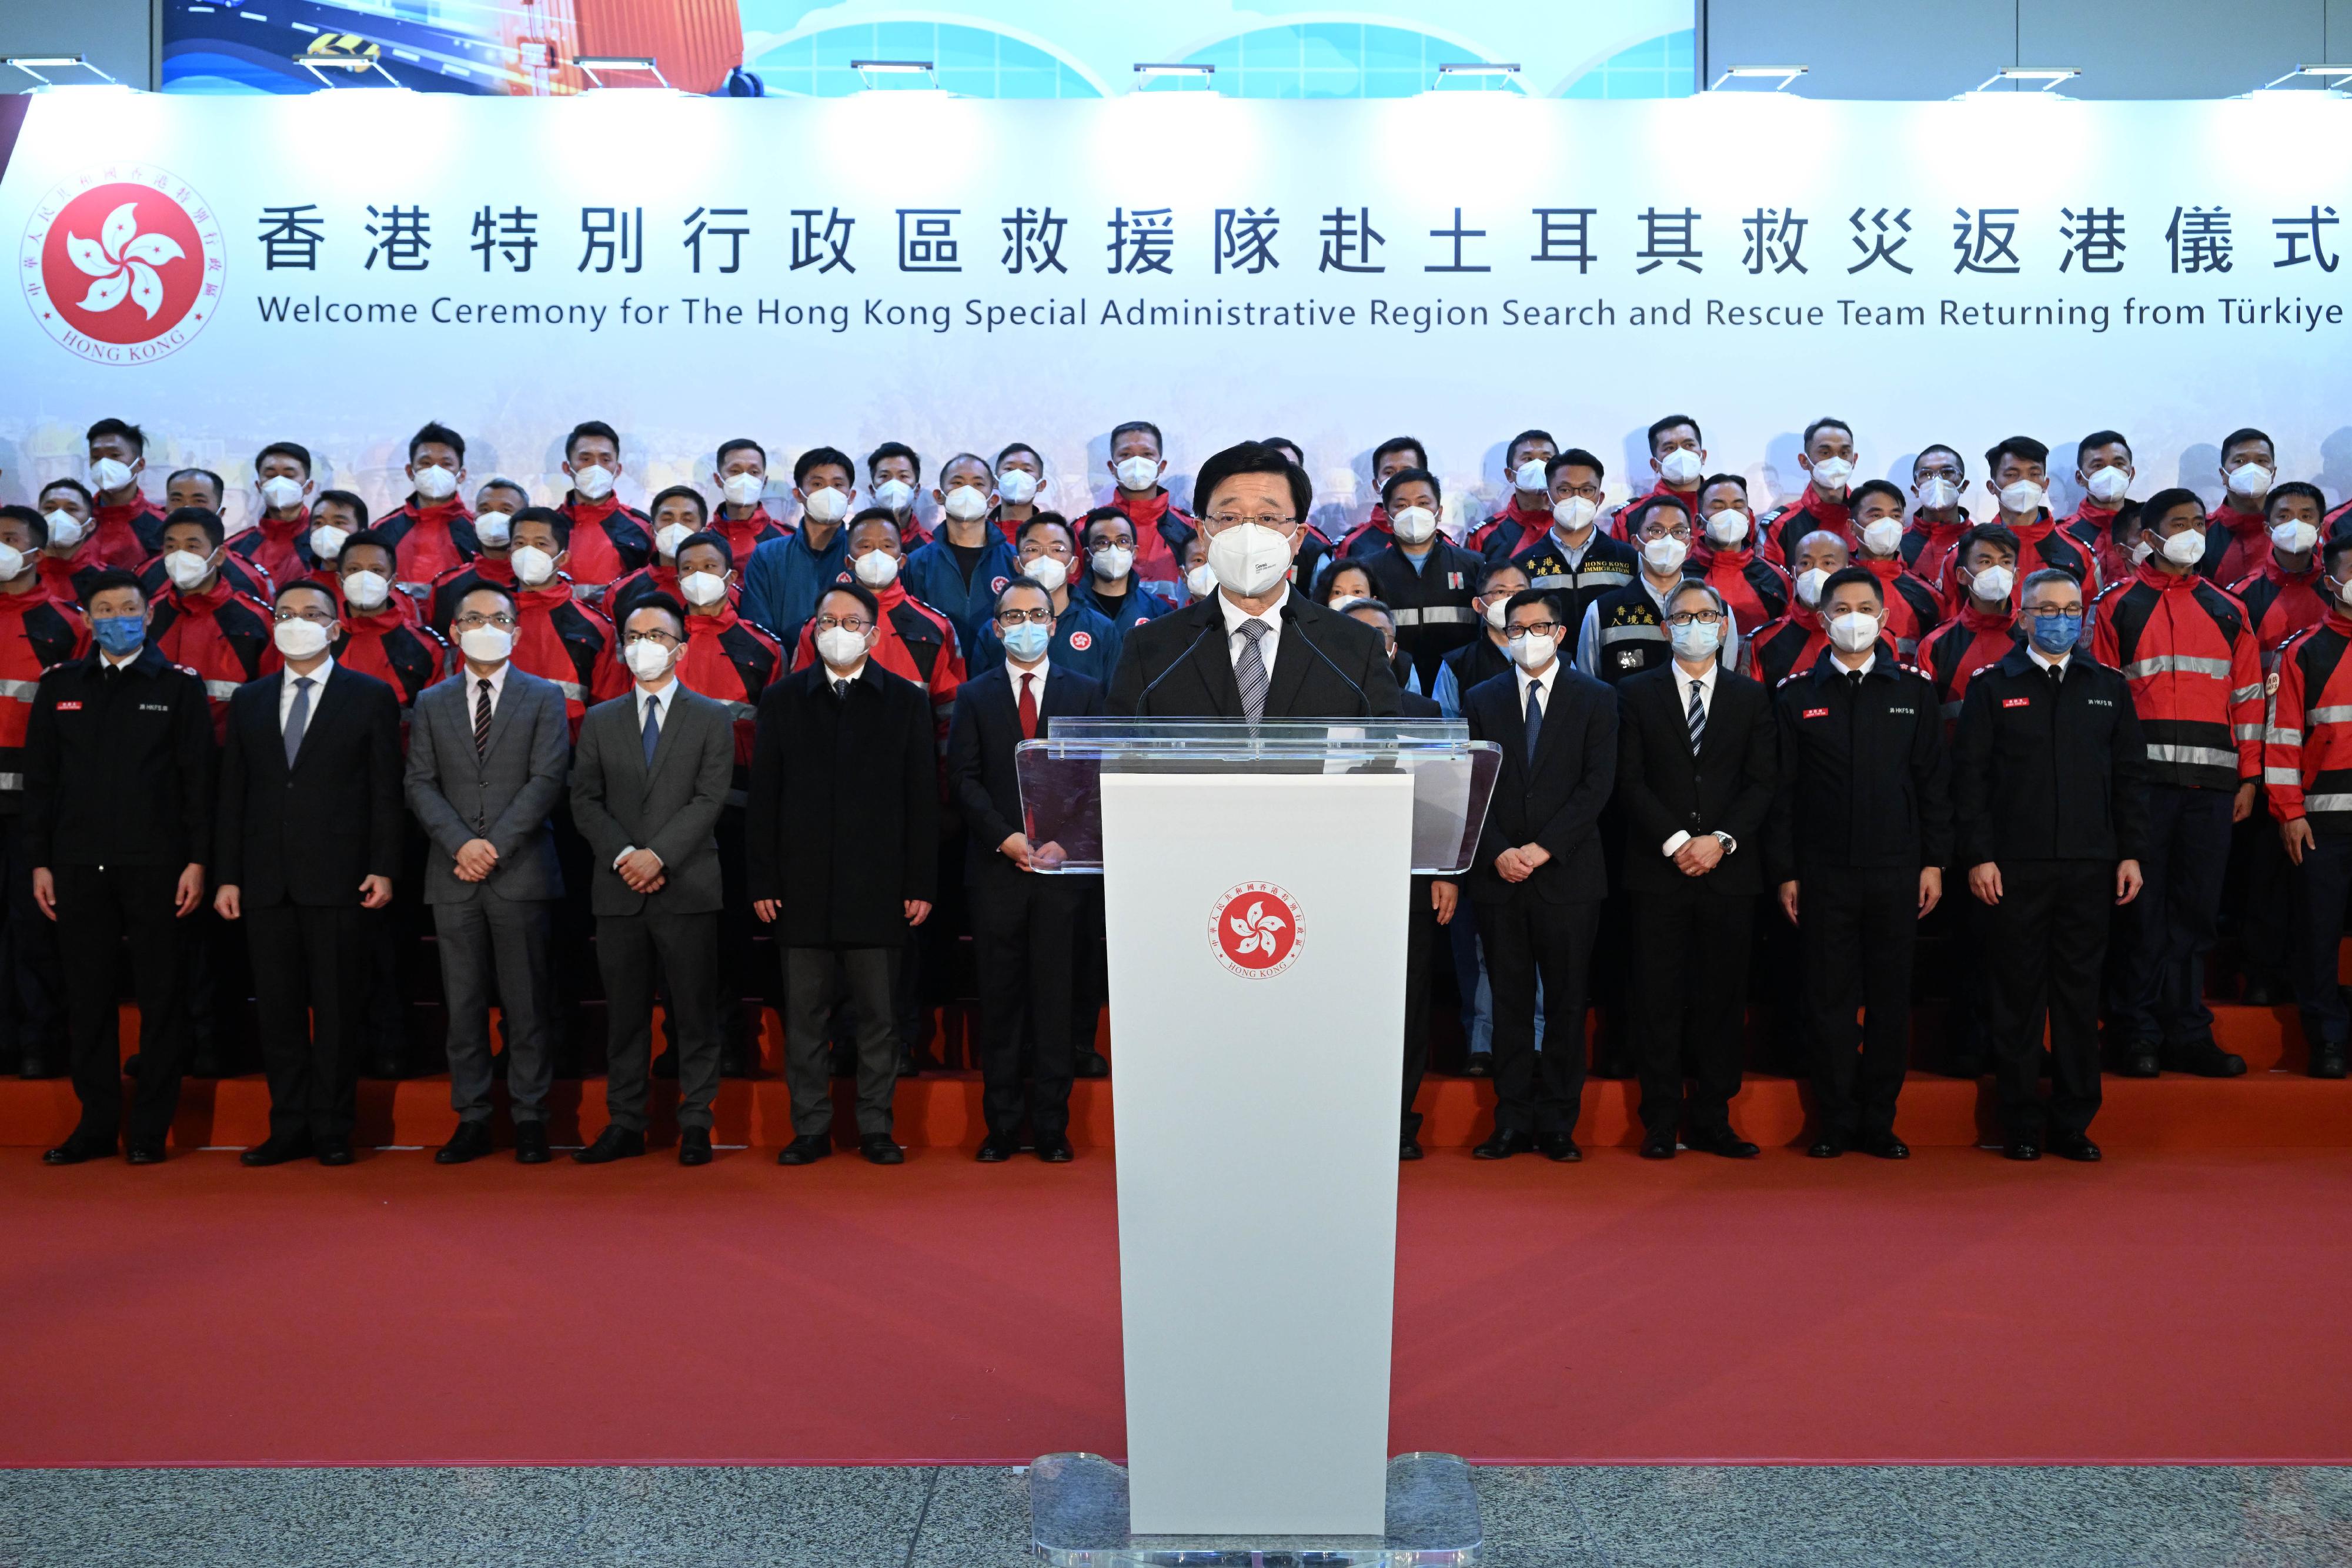 The Chief Executive, Mr John Lee, speaks at the Welcome Ceremony of the Hong Kong Special Administrative Region Search and Rescue Team returning from Türkiye today (February 18).